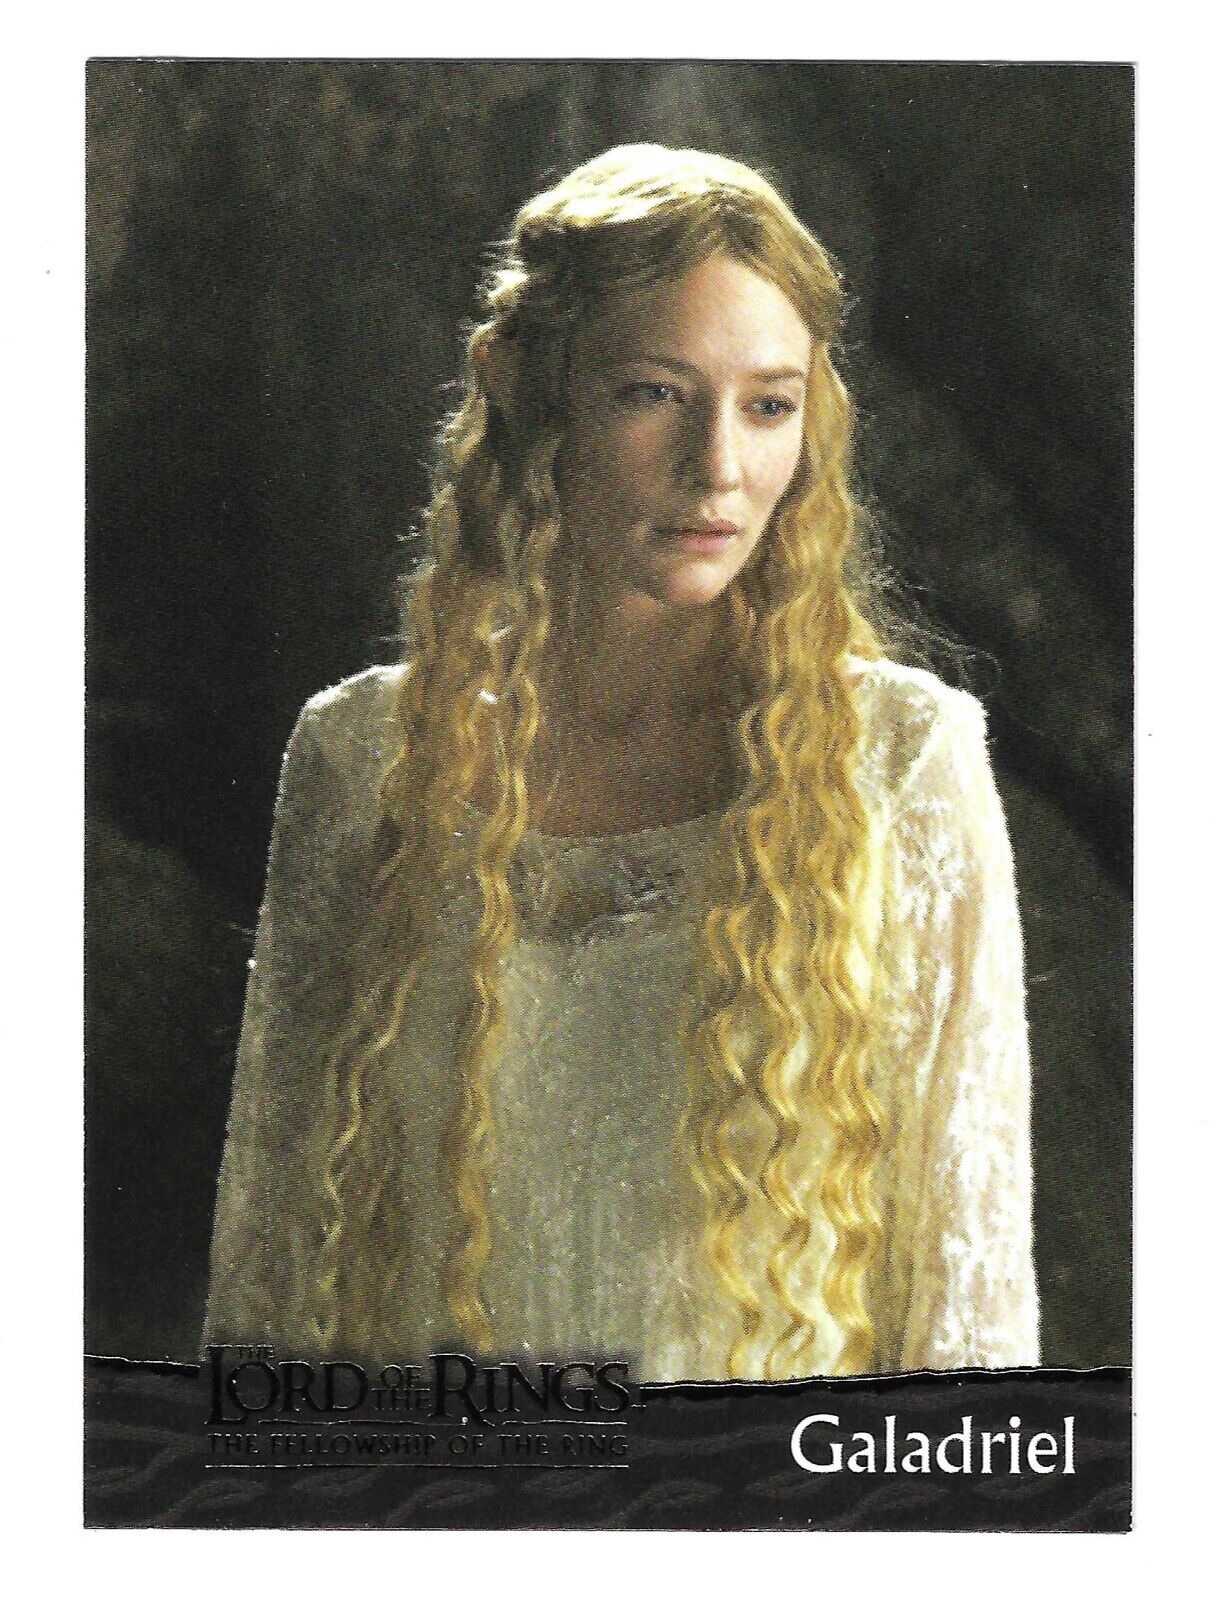 2001 Topps The Lord Of The Rings FOTR #14 Galadriel Rookie RC Cate Blanchett